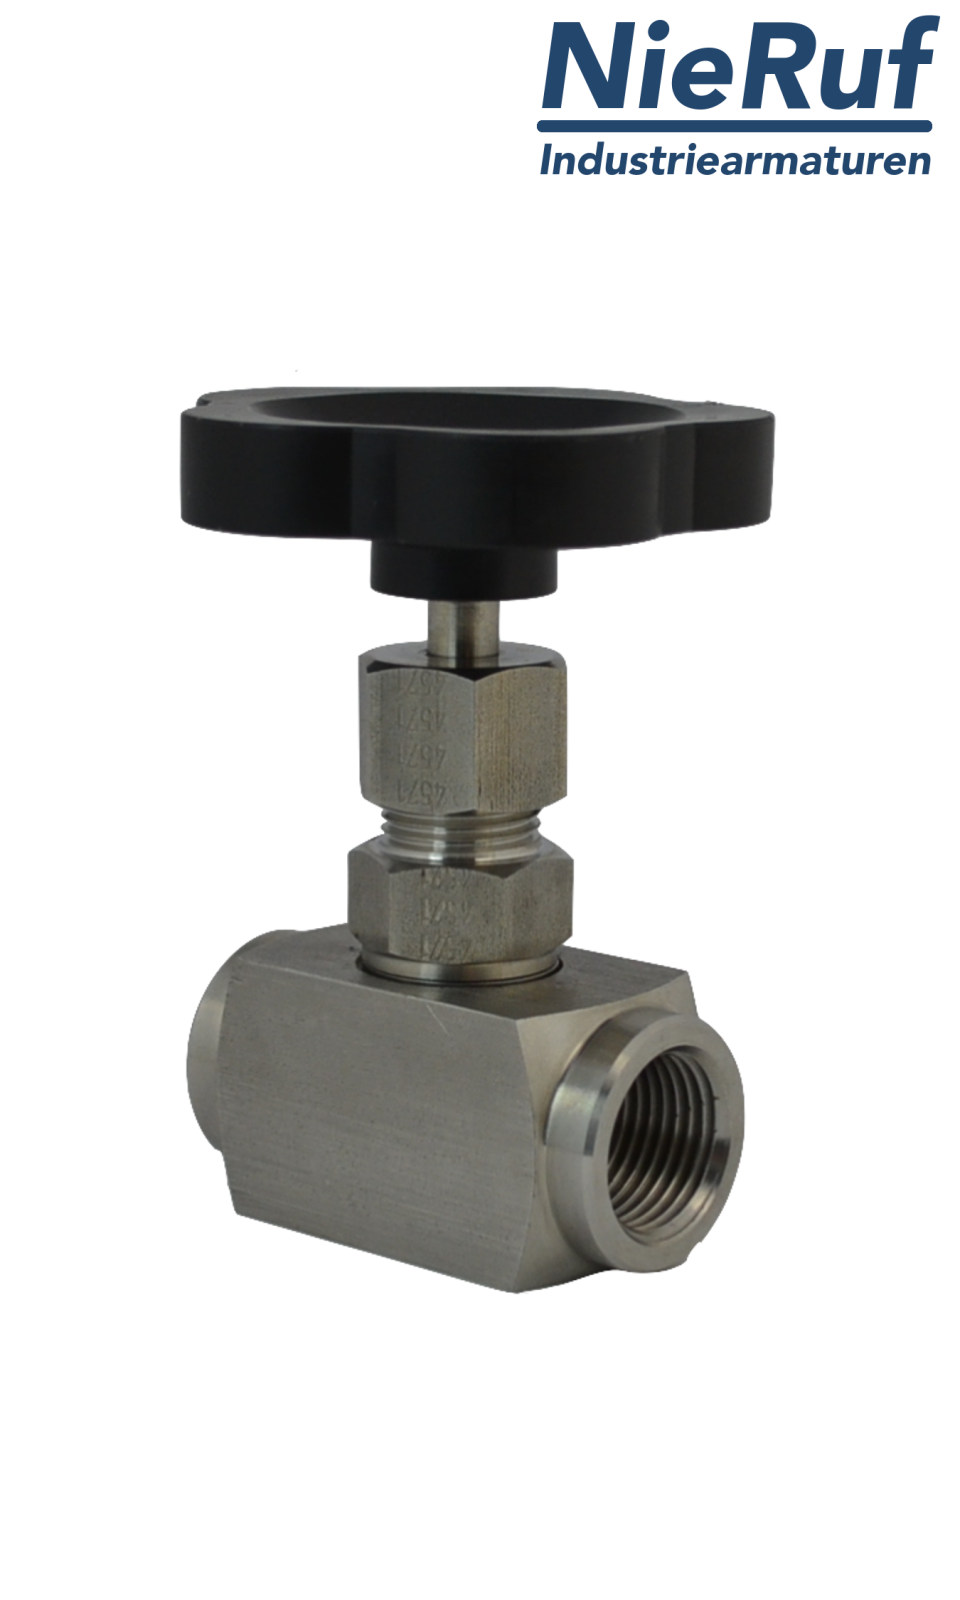 high pressure needle valve  1/2" inch NV01 stainless steel 1.4571